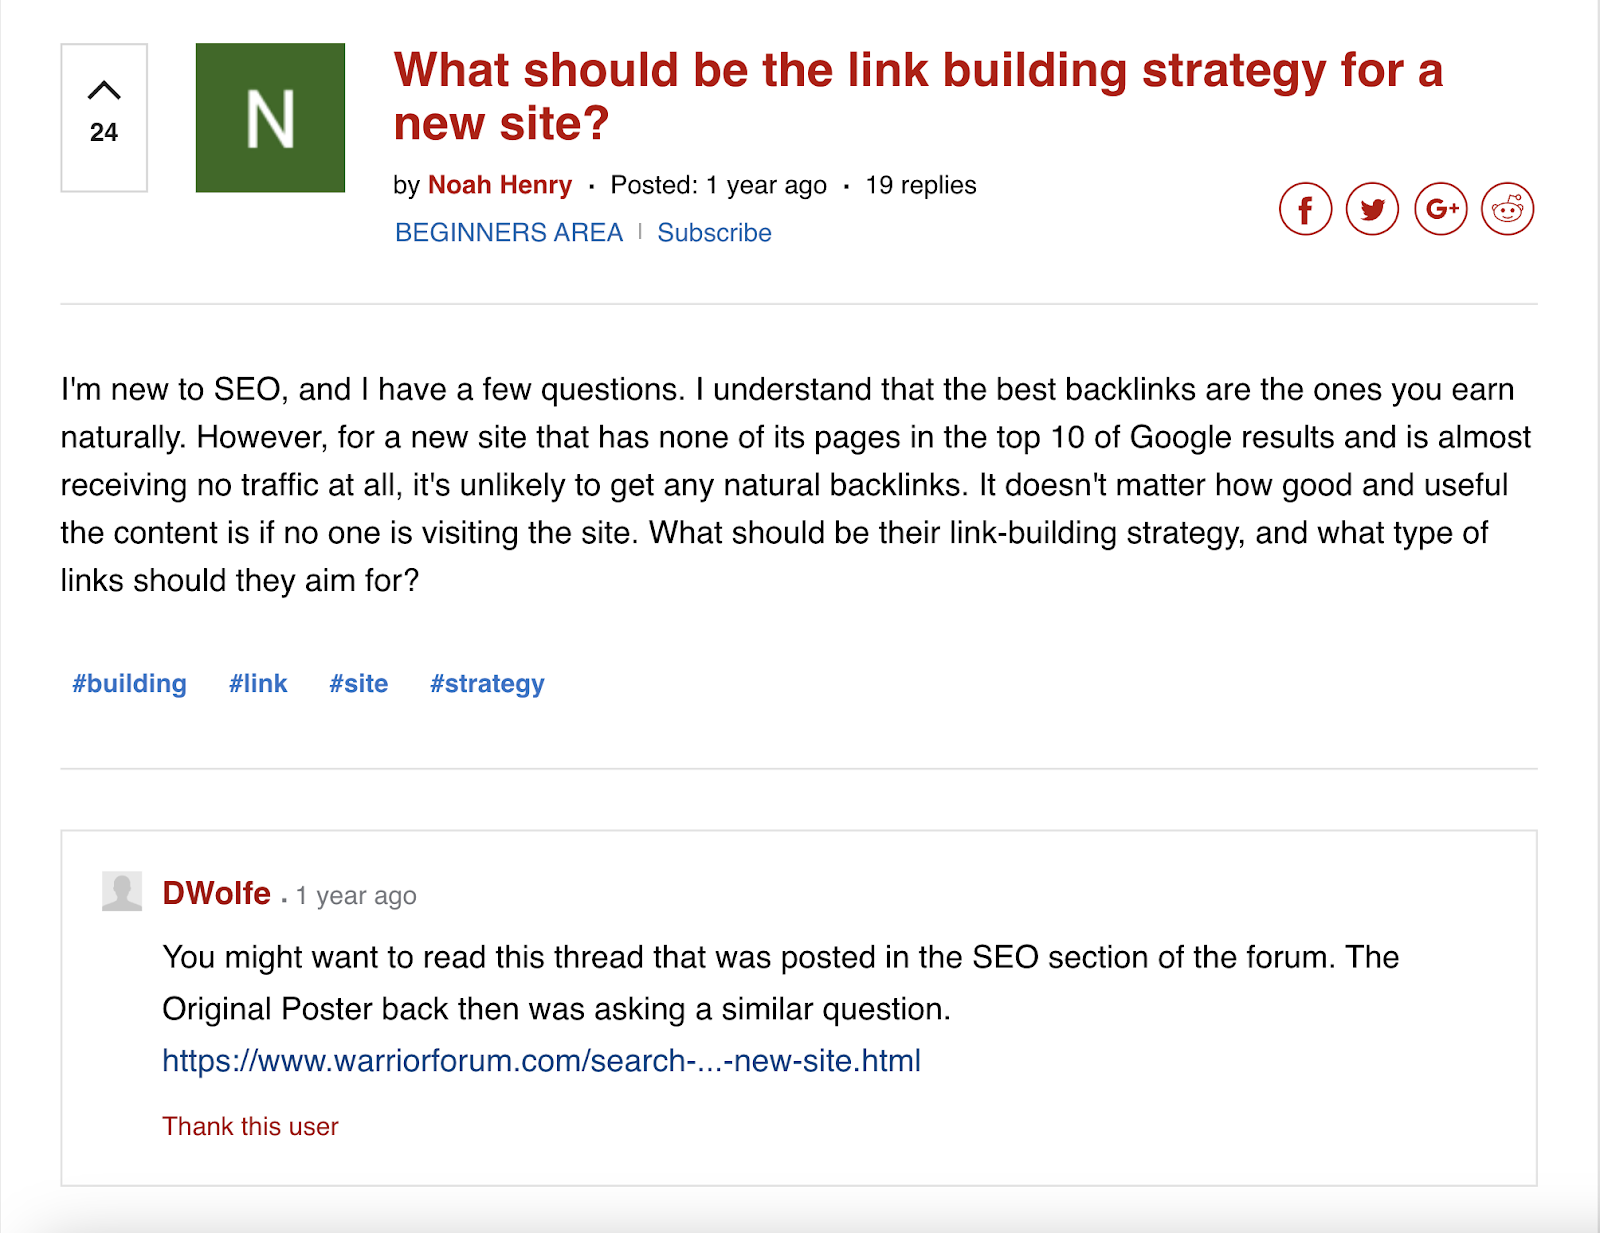 Warrior Fo، thread asking what s،uld be the link building strategy for a new site. A reply answers with a link to another, similar thread.